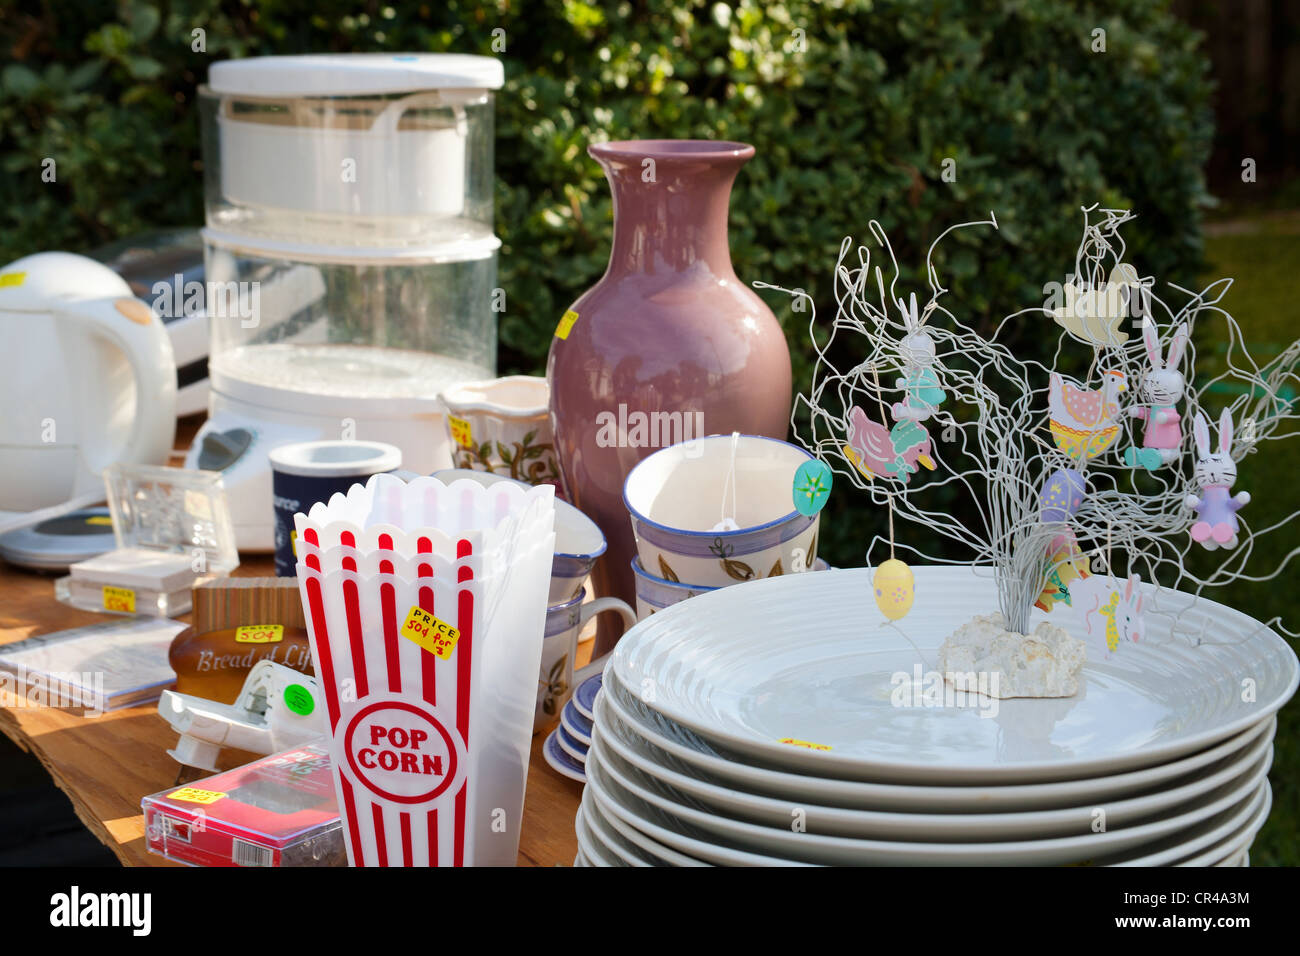 Items for sale at a garage sale Stock Photo